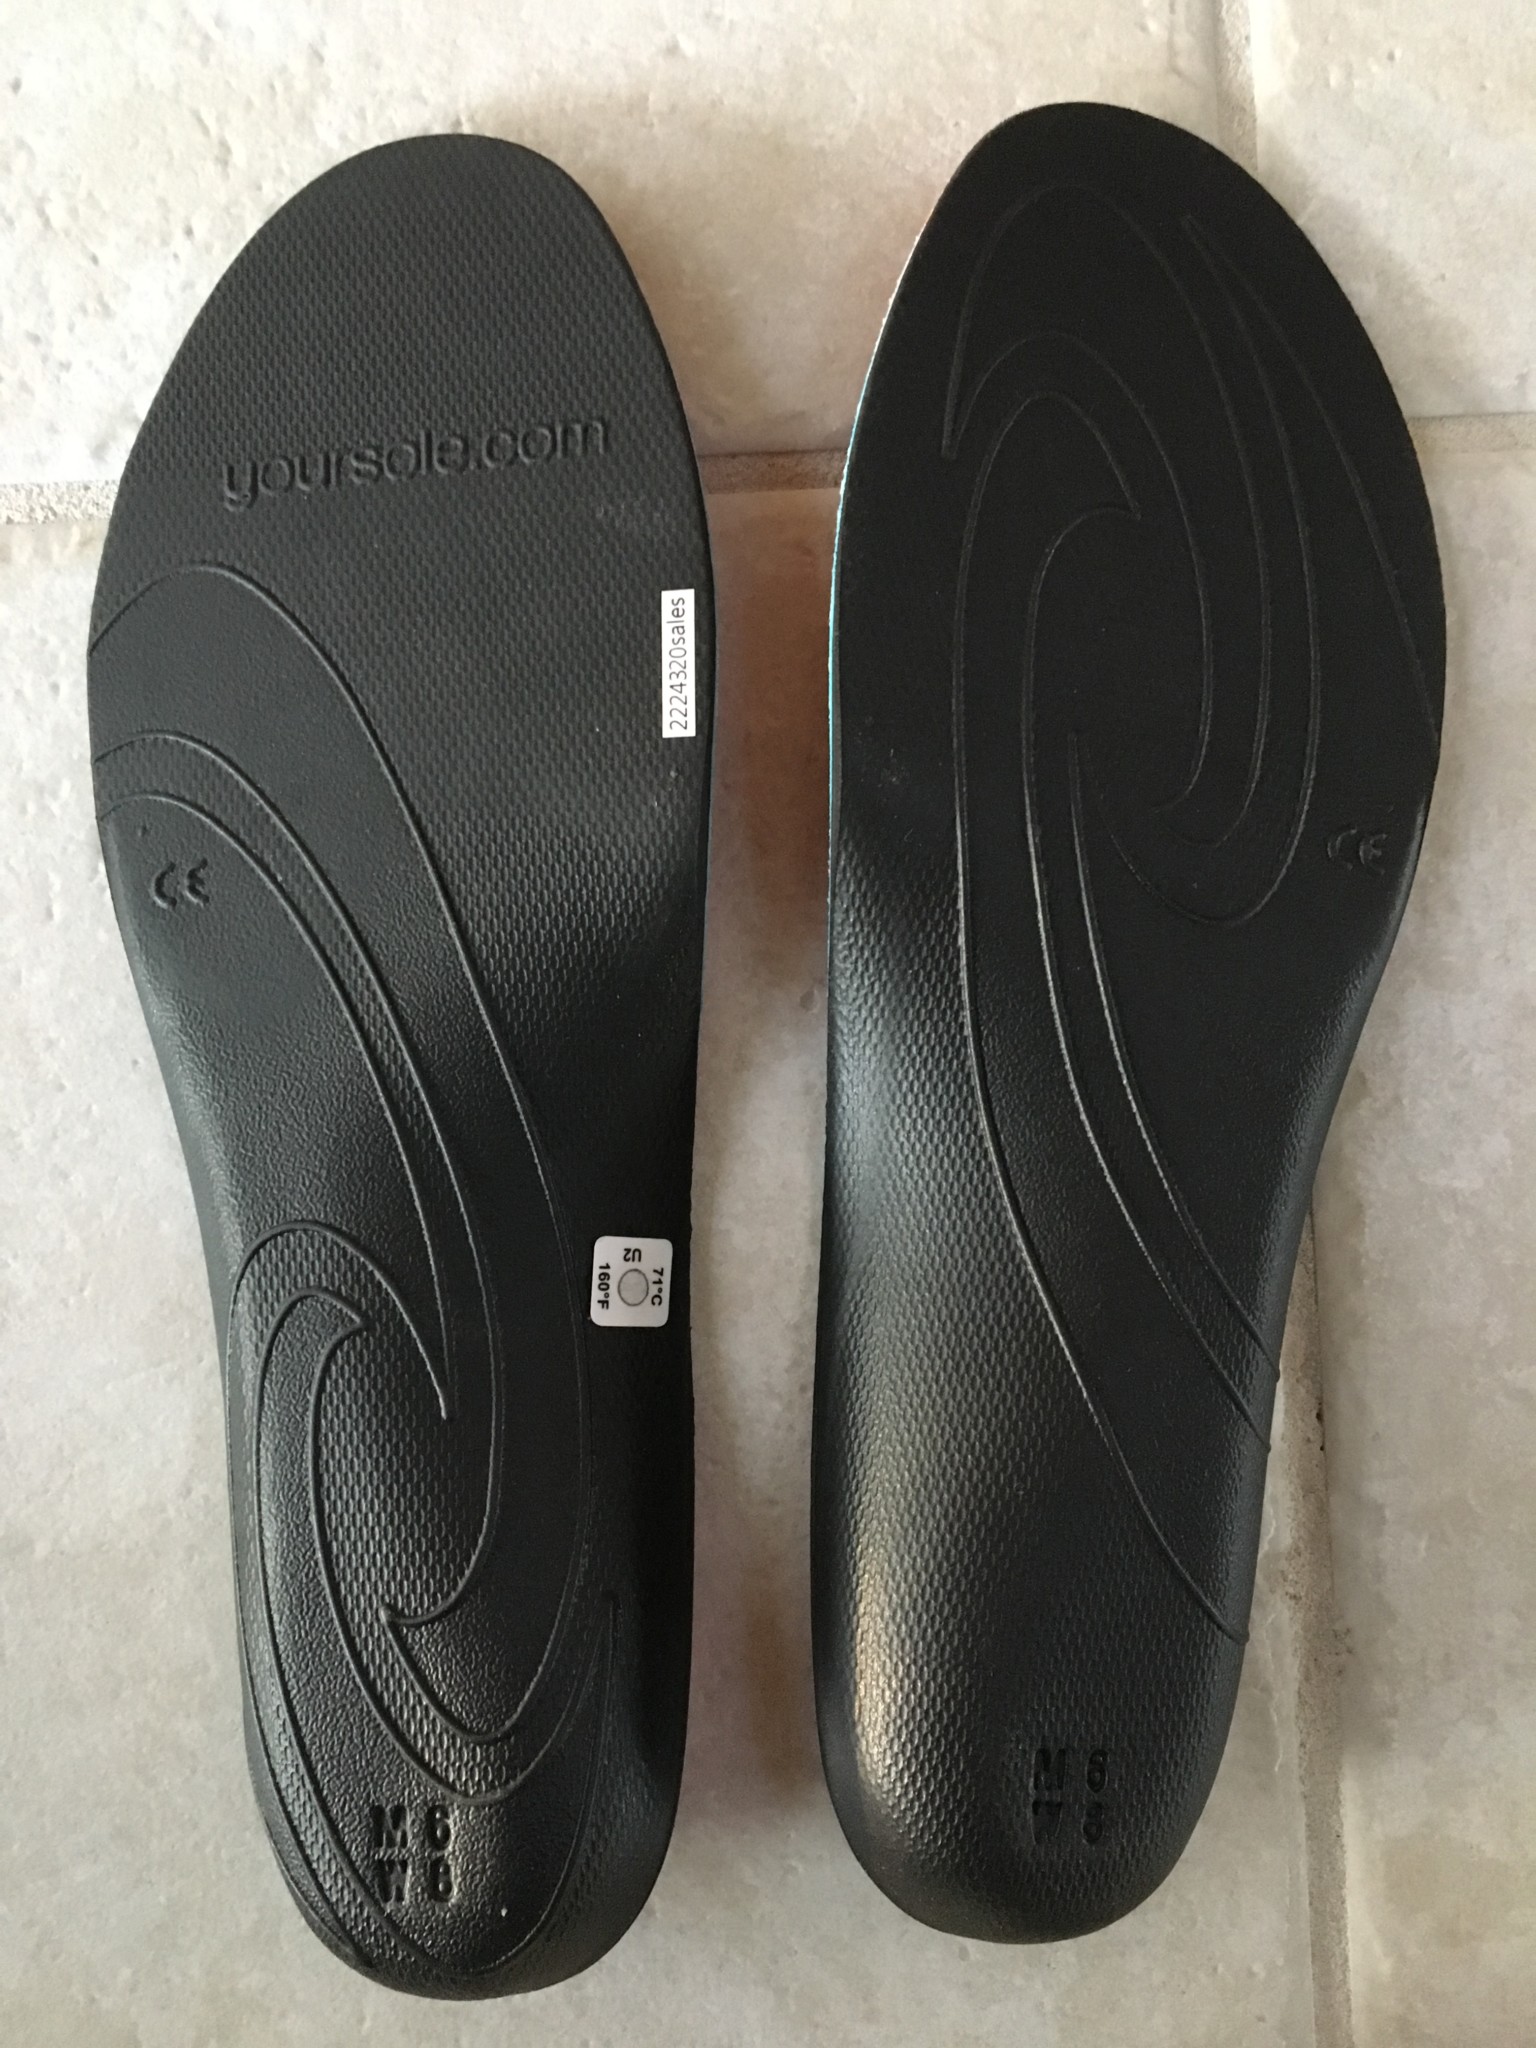 Bottom of SOLE Active Insoles - Hiking Lady